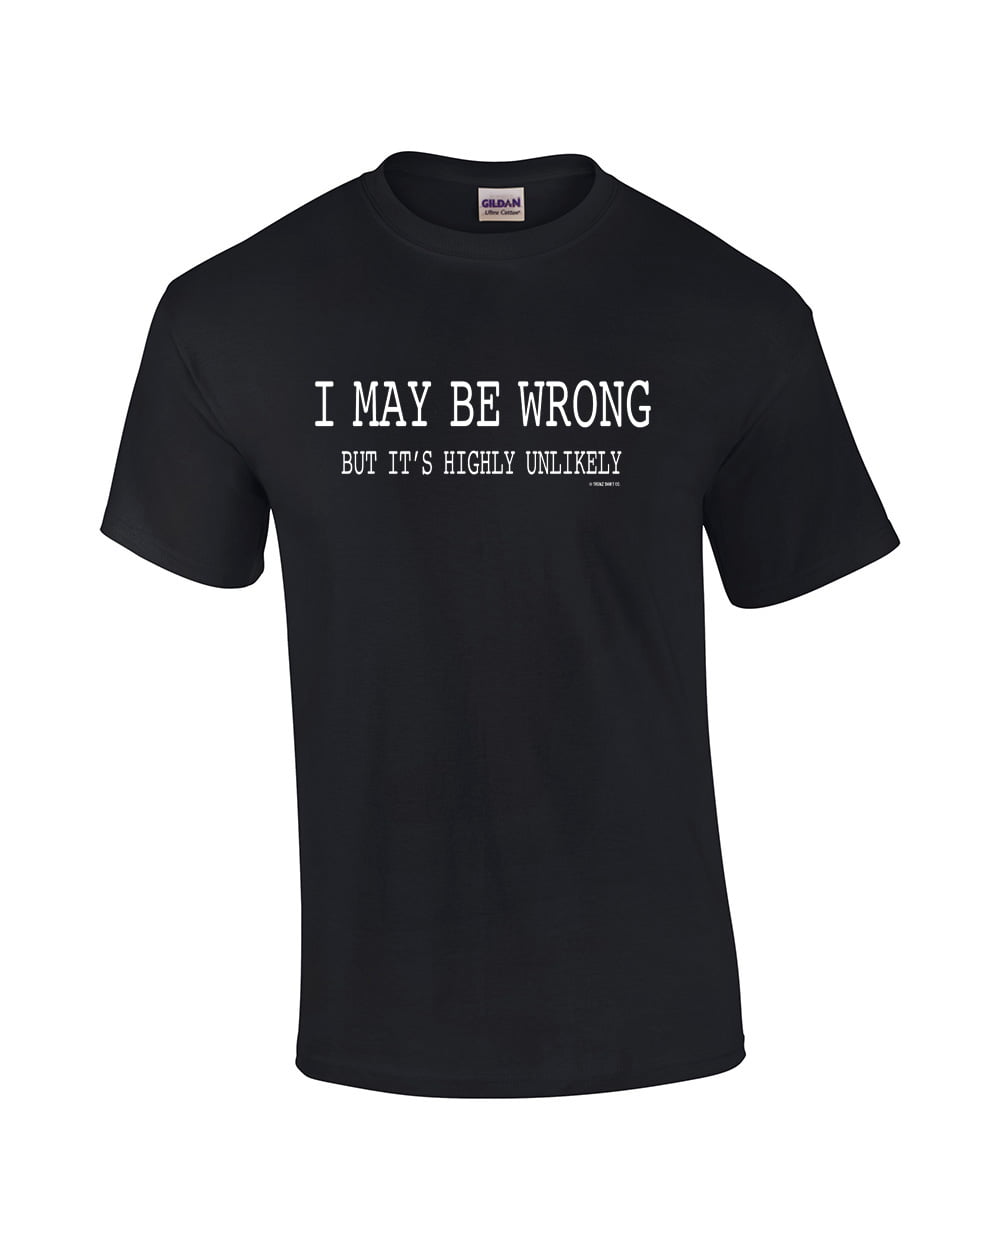 I Have A Job Car House 401K ...| Funny T-shirt Mens T-shirt Single T-shirt Guys T-shirts Funny T-shirts For Guys